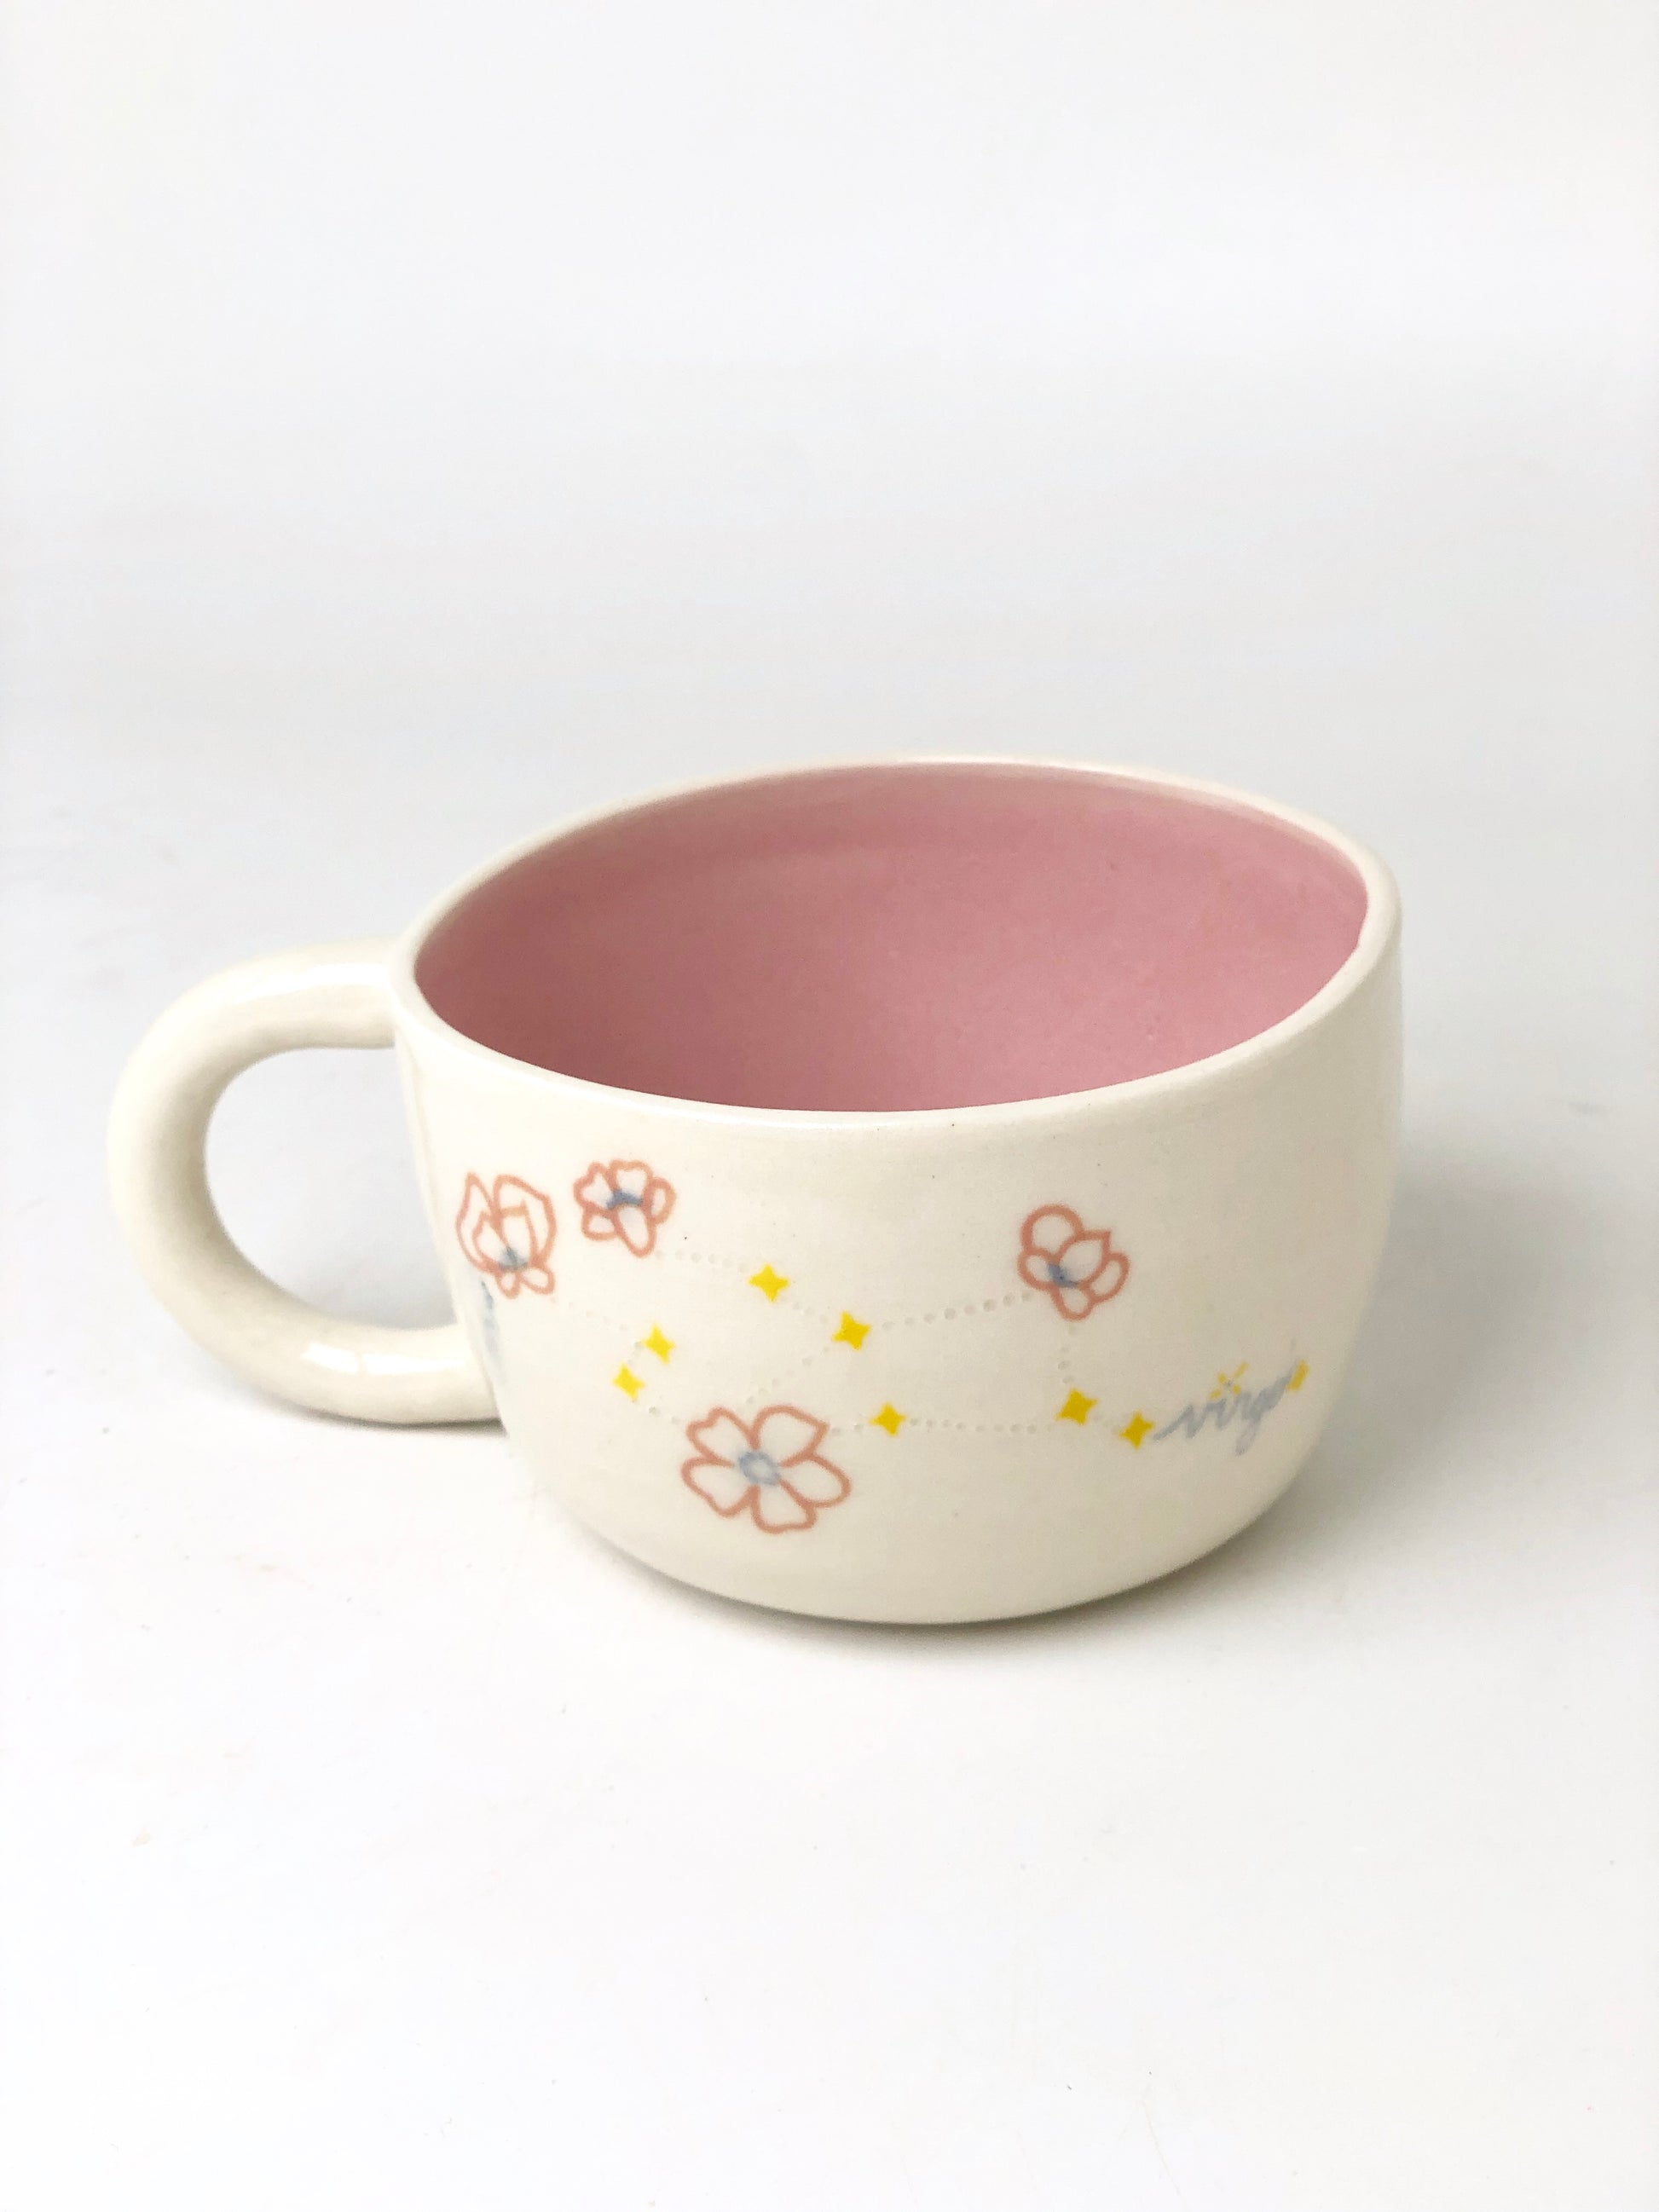 White mug with light pink inside and light blue, pink, and yellow star and flower details. Cursive small light blue text on the mug reads "Virgo."